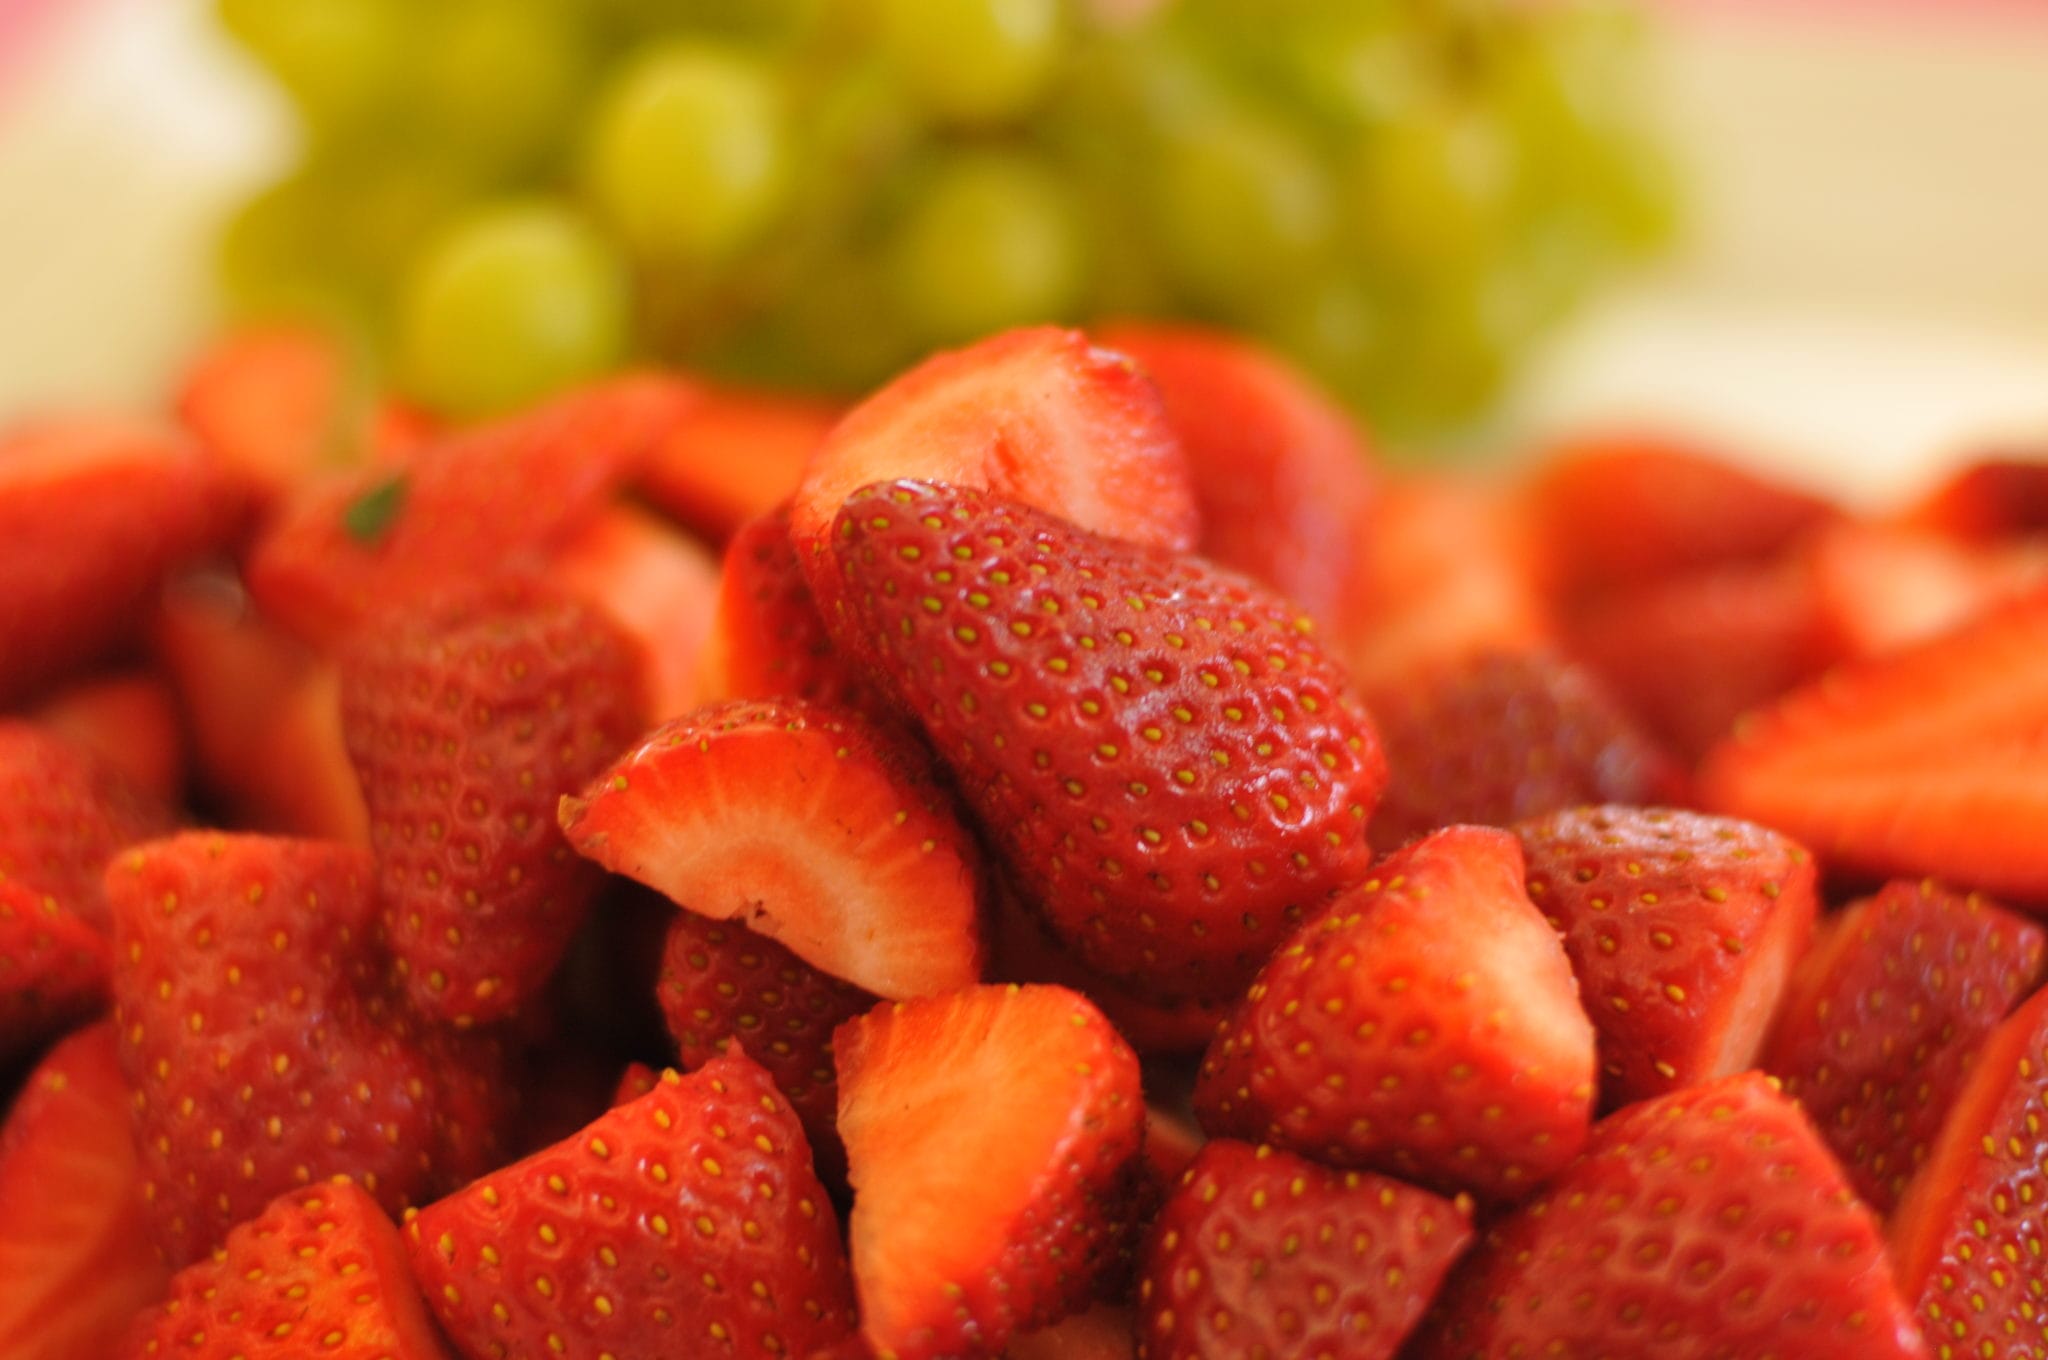 Close-up of freshly sliced strawberries with a bunch of green grapes in the background.